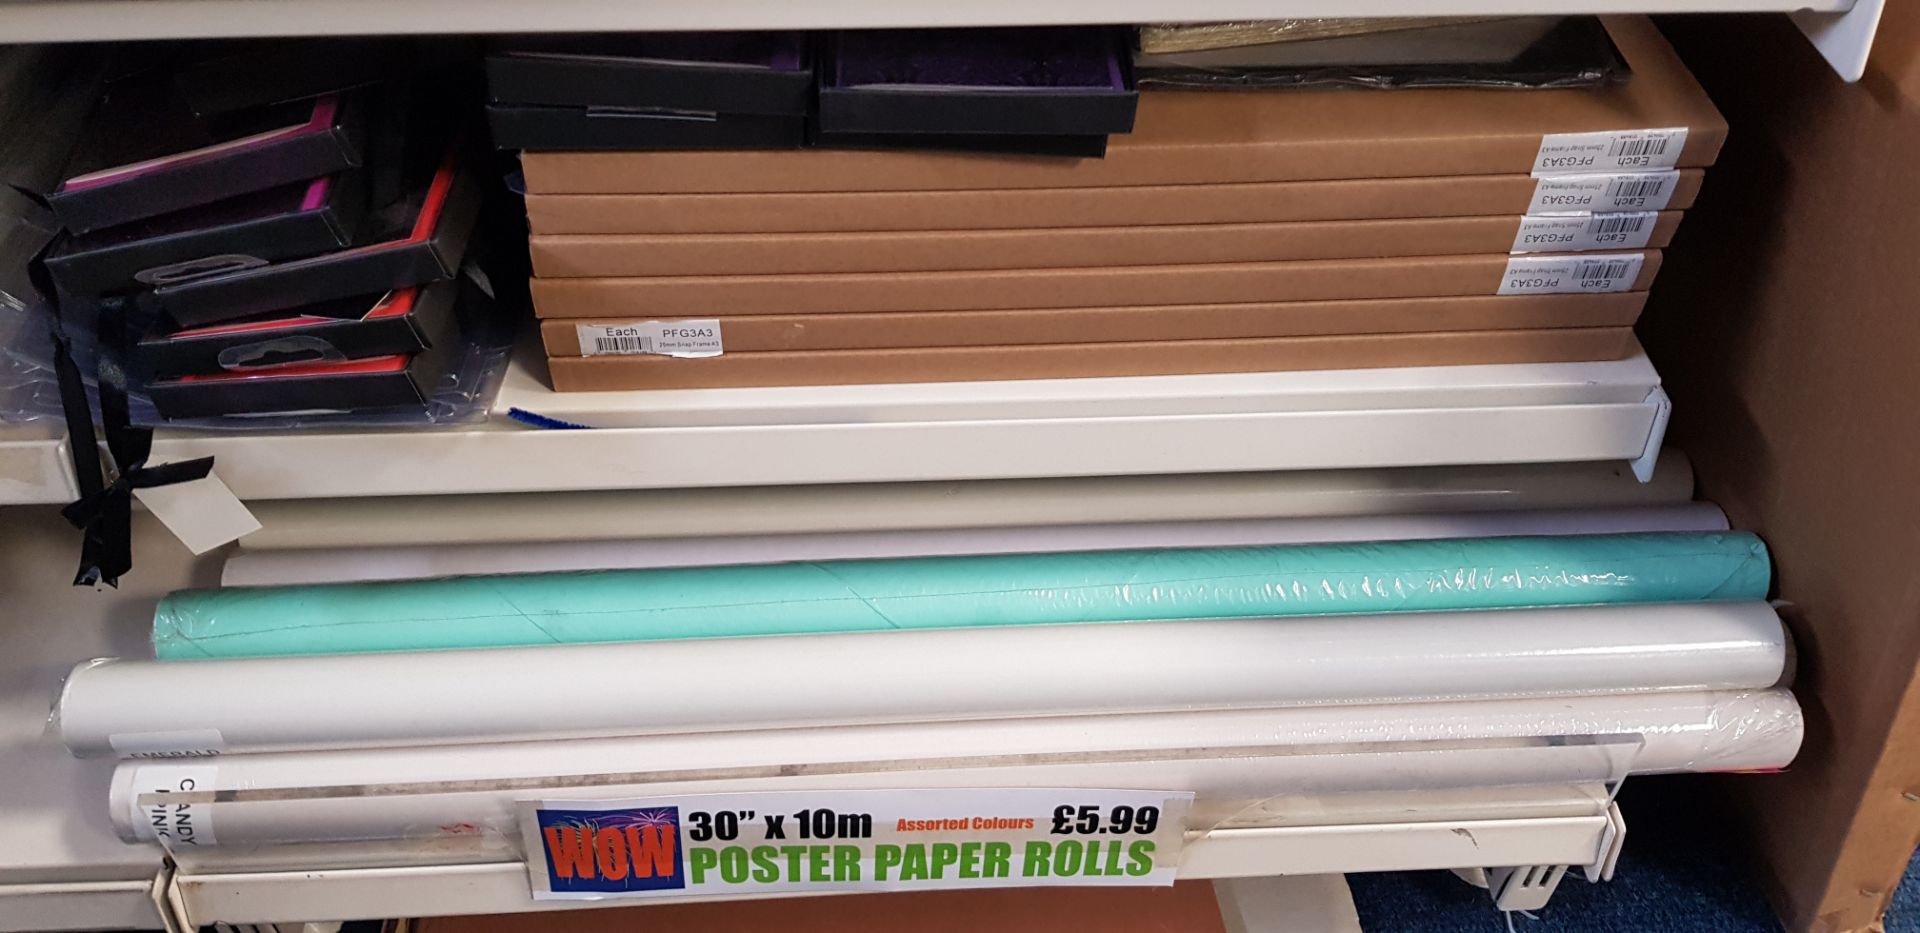 Two shelves with 14 rolls of poster paper and 6 A3 size snap frames & notelets